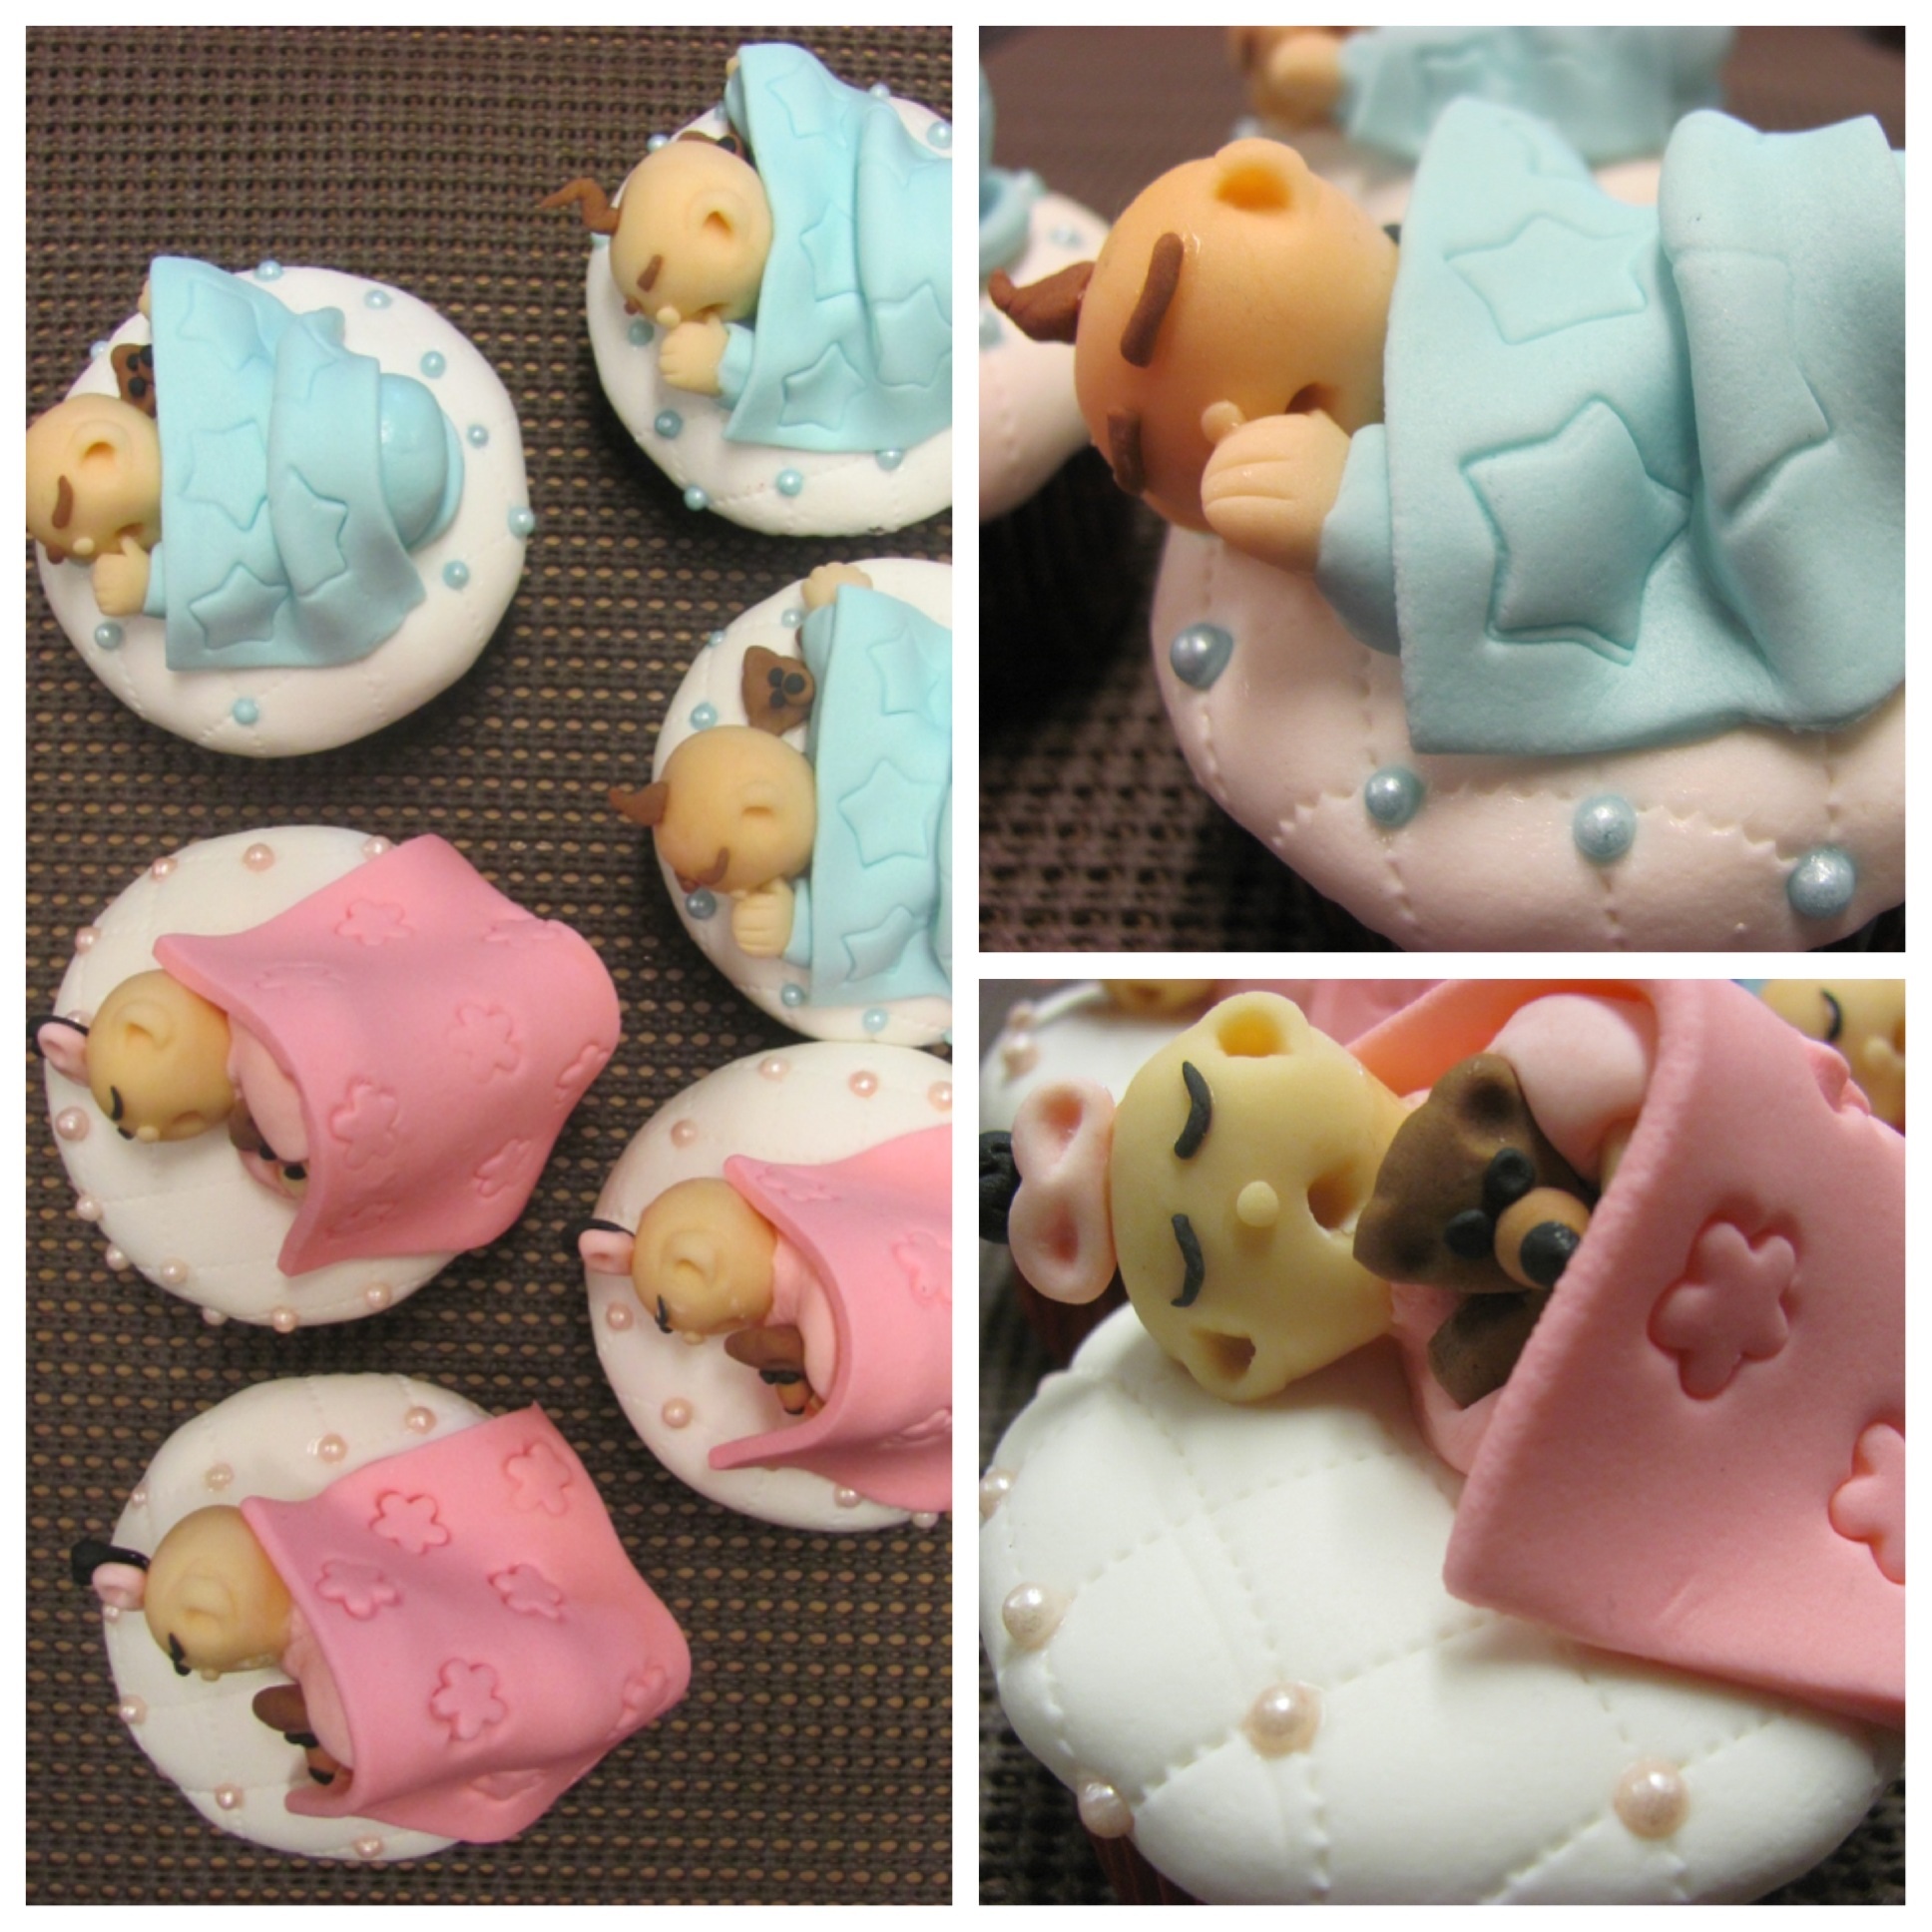 fondant babies and blankets by Mika Iniquez